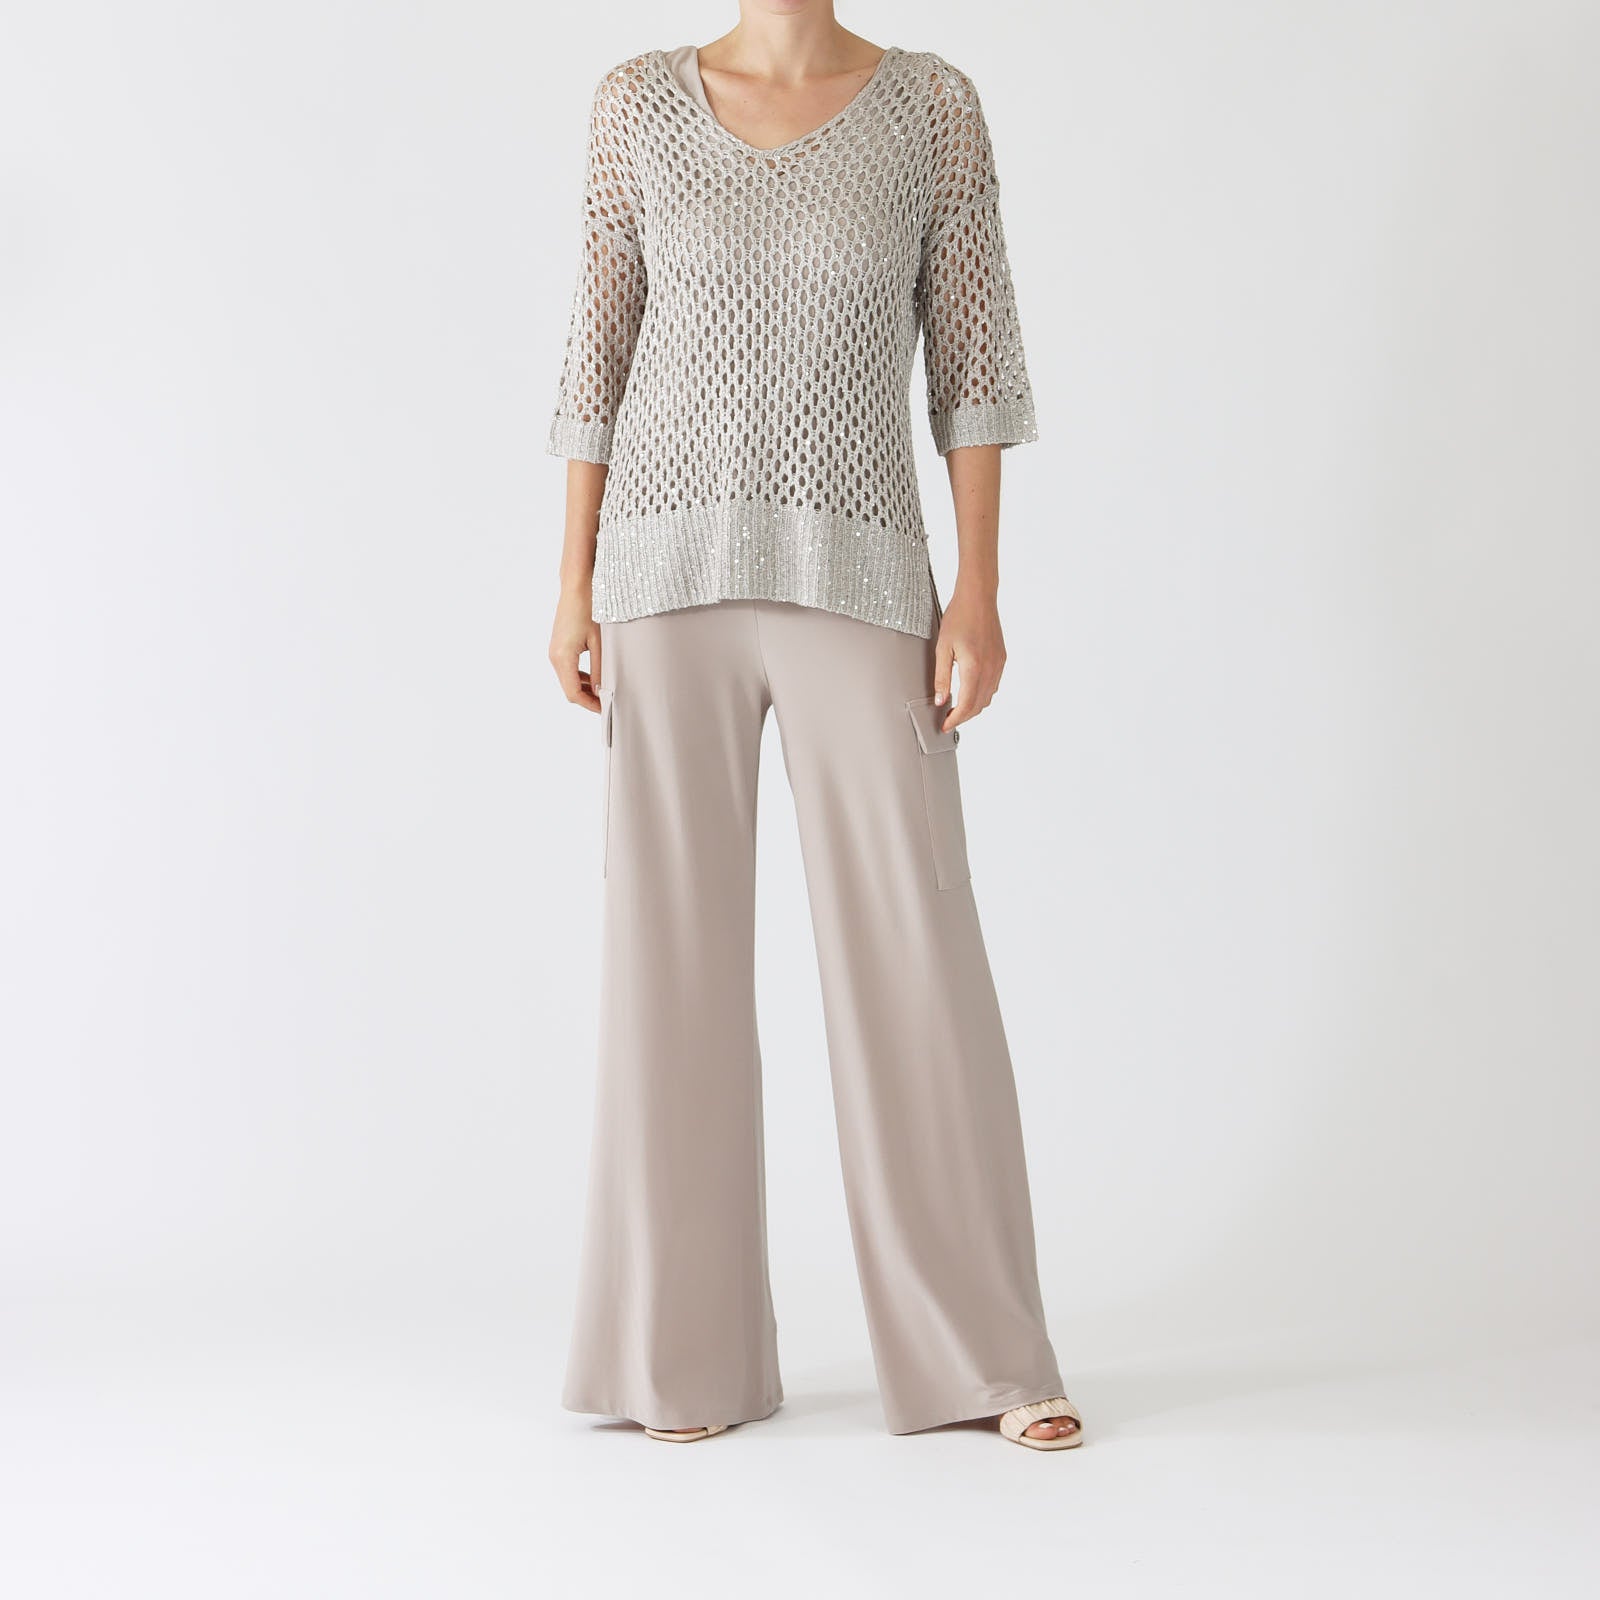 Champagne Open Knit Sequin Sweater